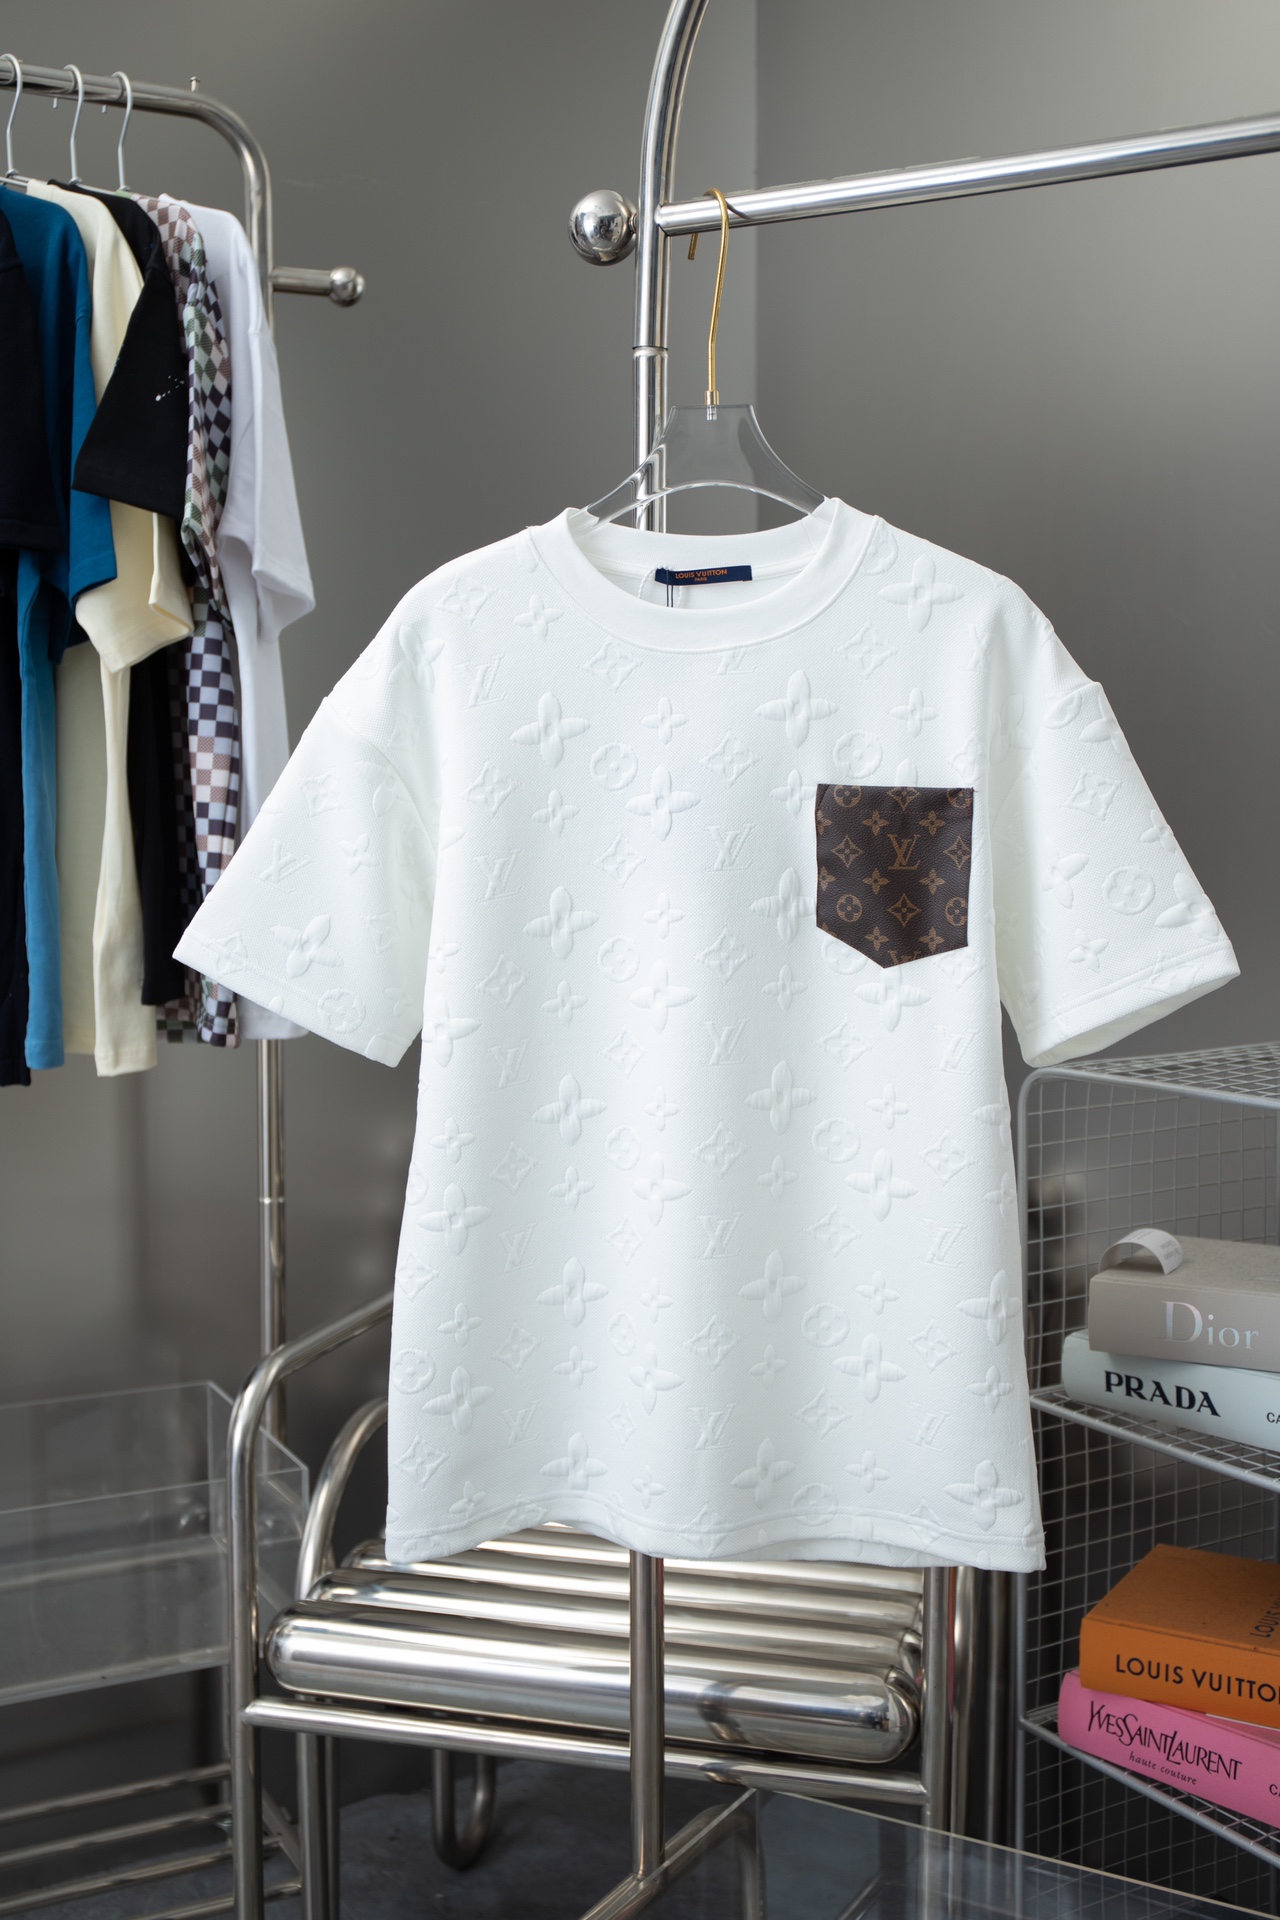 Louis Vuitton Clothing T-Shirt Unisex Cotton Spring/Summer Collection Fashion Short Sleeve